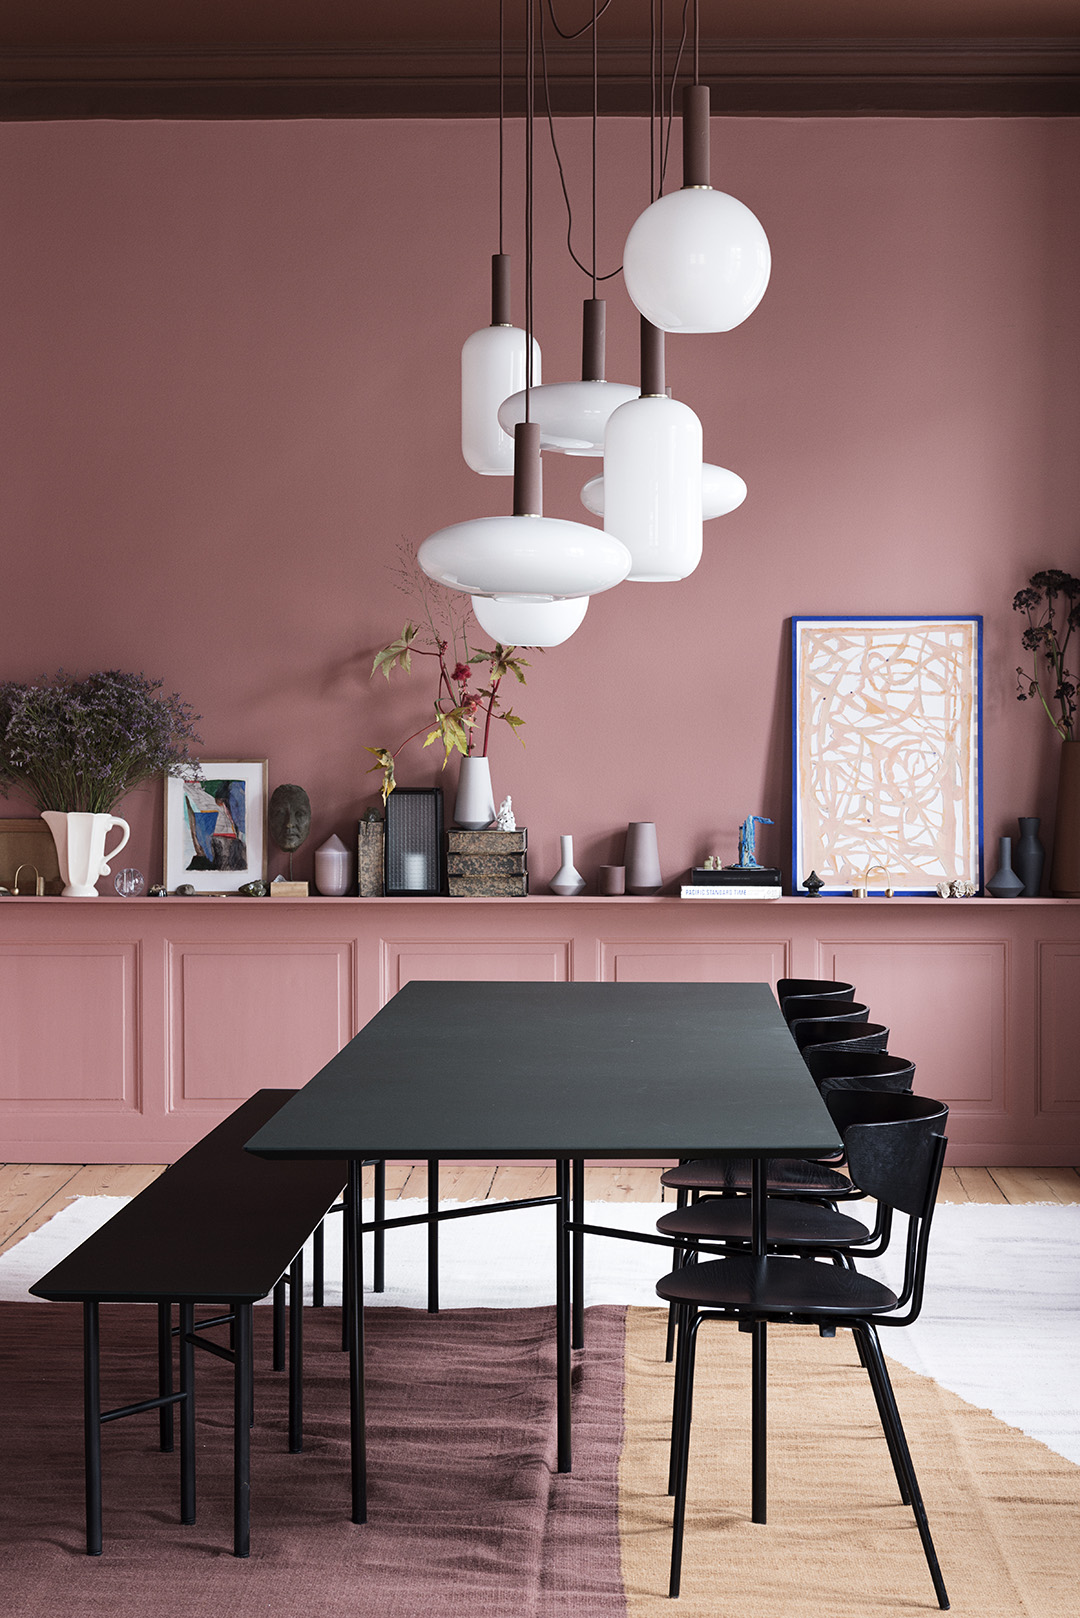 The pink color in the interior: one of the trends of 2019